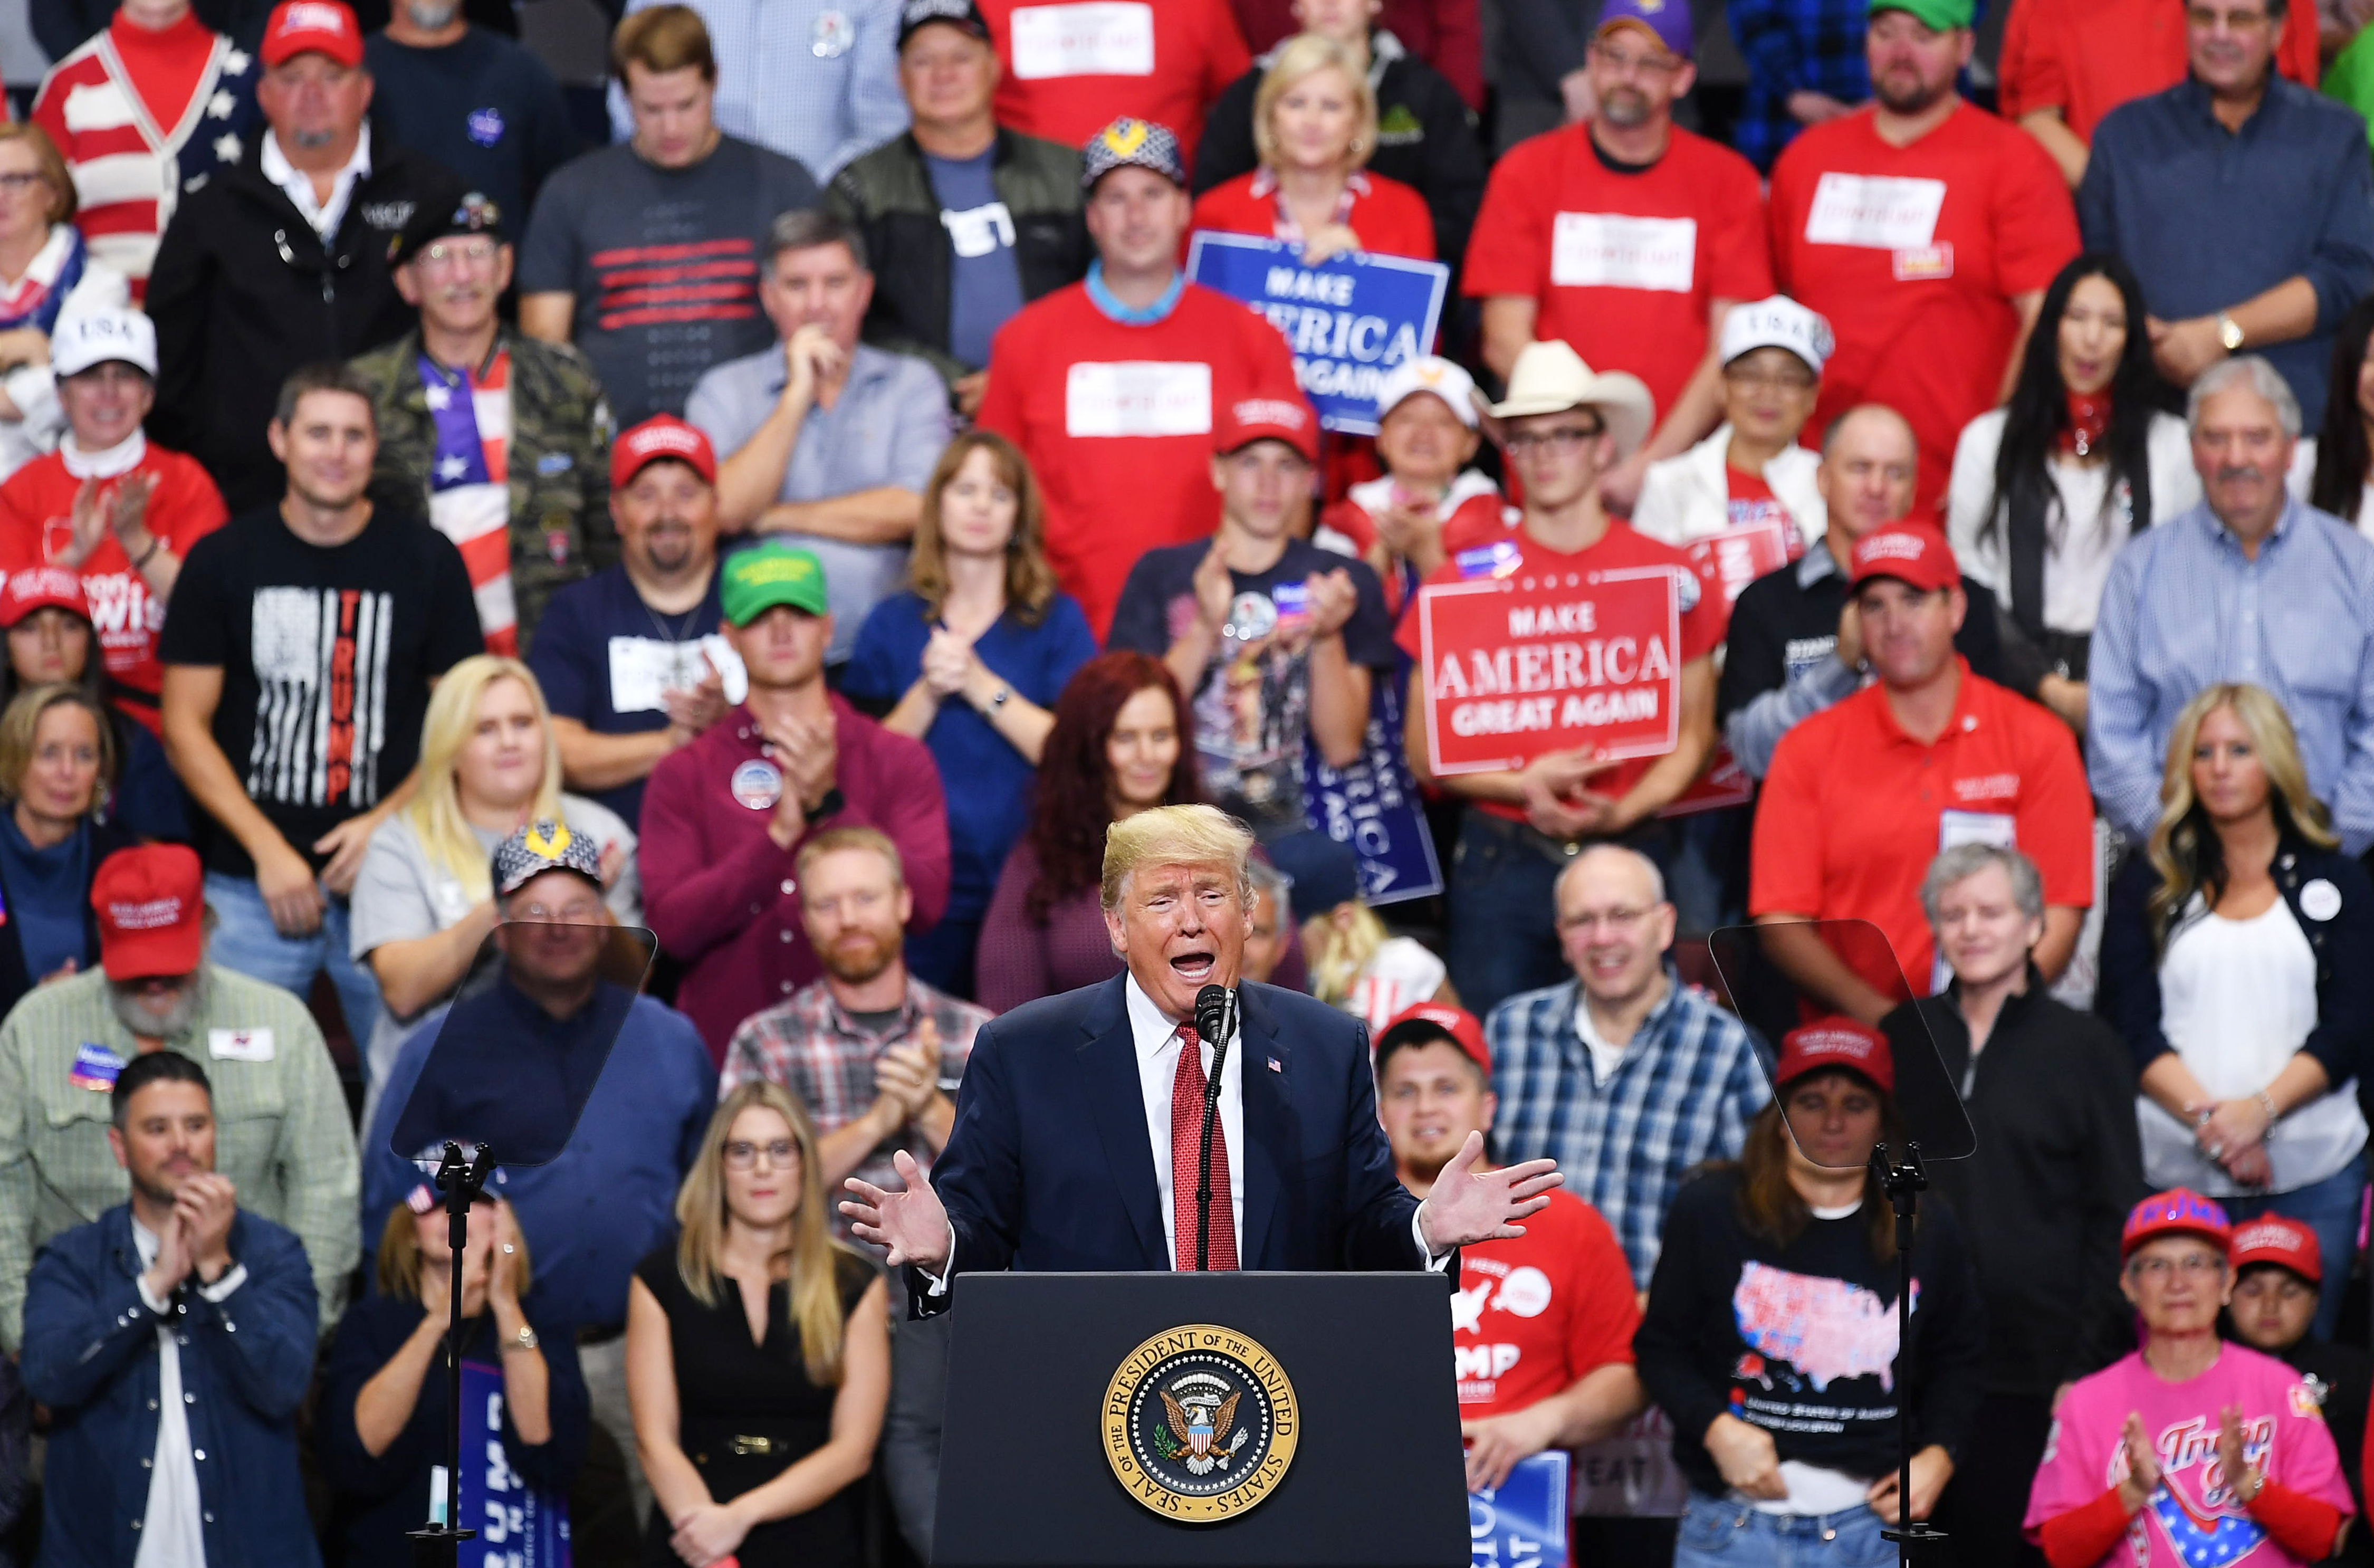 US President Donald Trump speaks during a rally at the Mayo Civic Center in Rochester, Minnesota on October 4, 2018. MANDEL NGAN/AFP/Getty Images